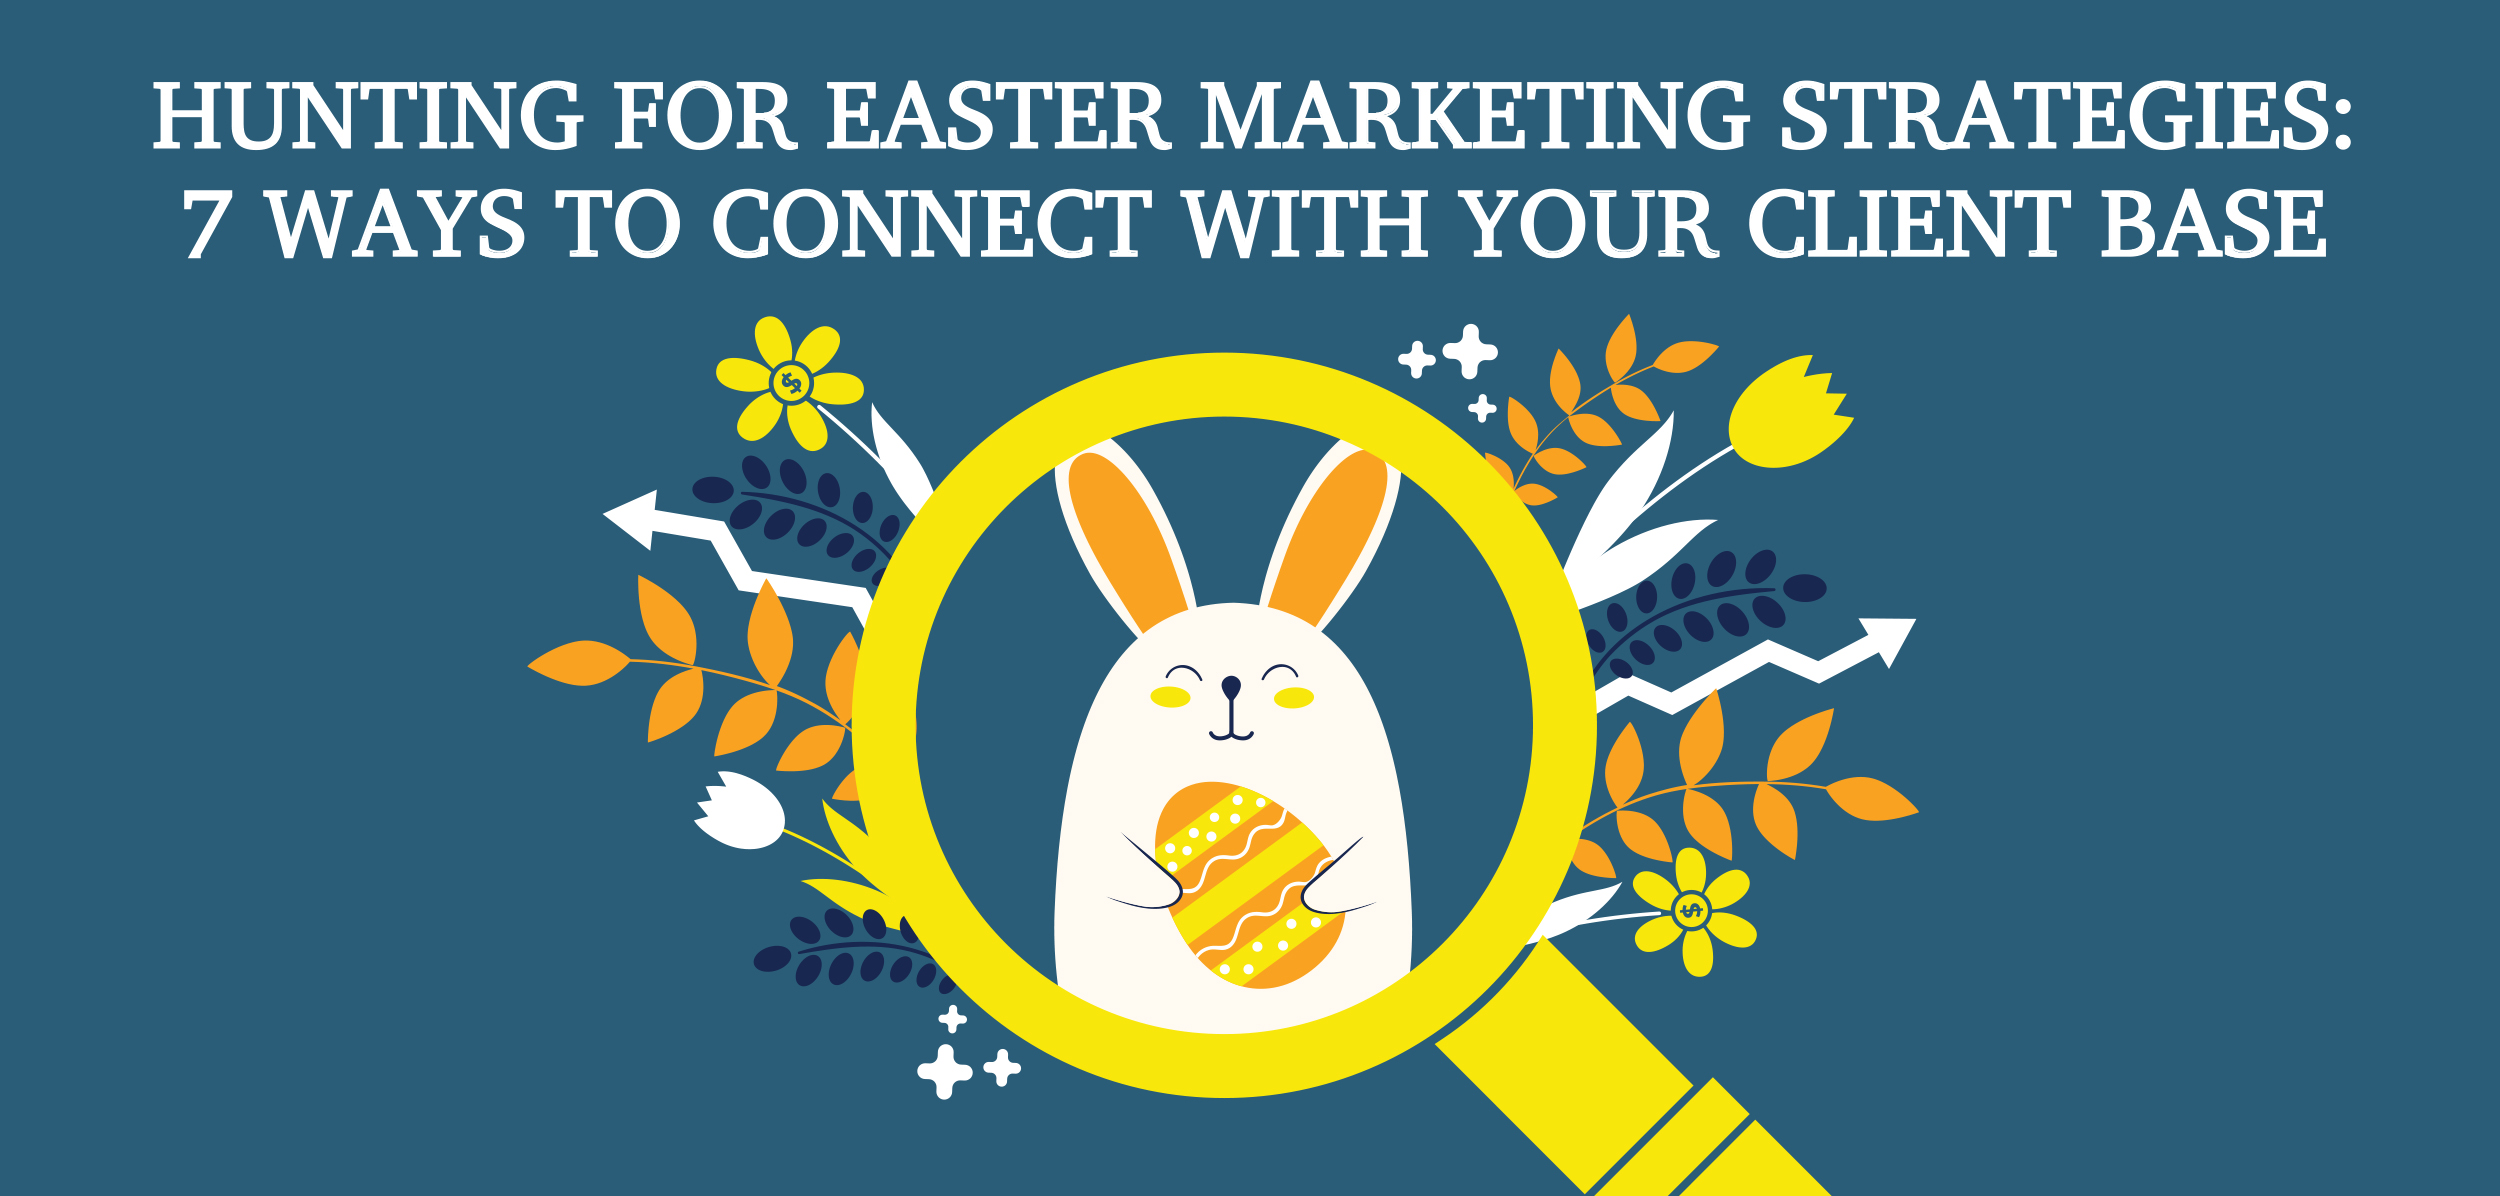 Marketing for the Easter holiday